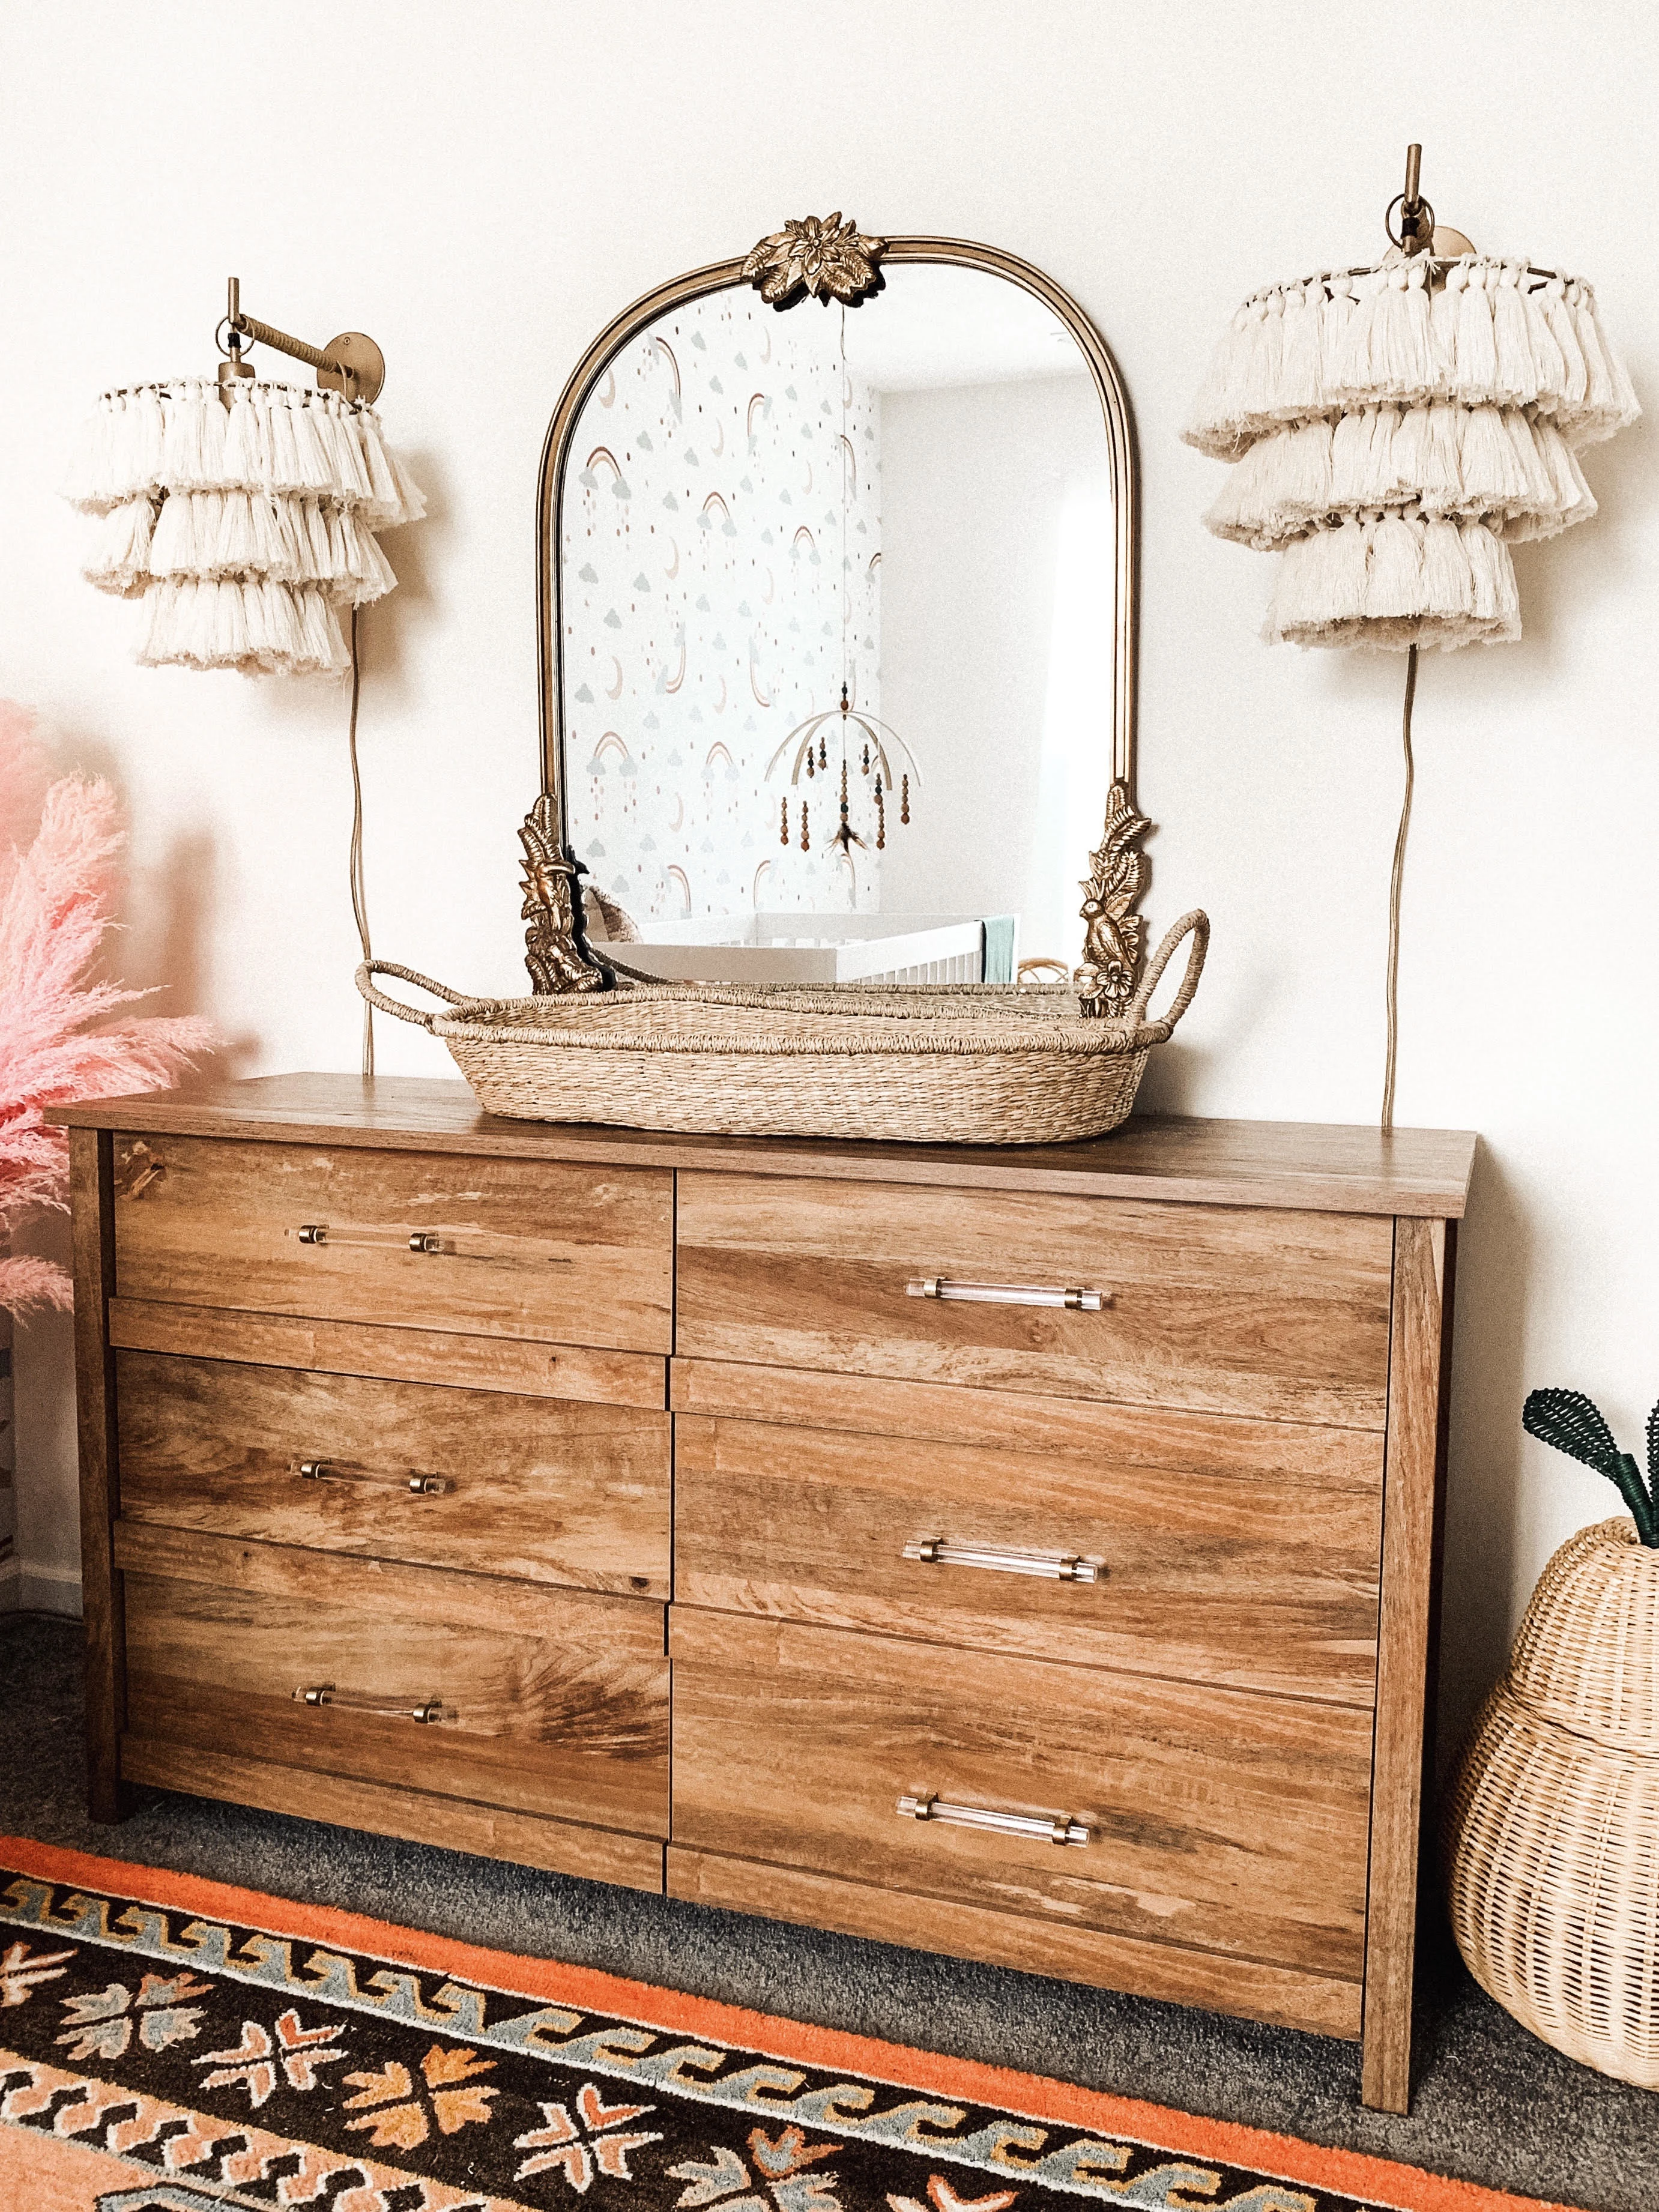 Wood Dresser with Changing Basket and Tassel Wall Pendants